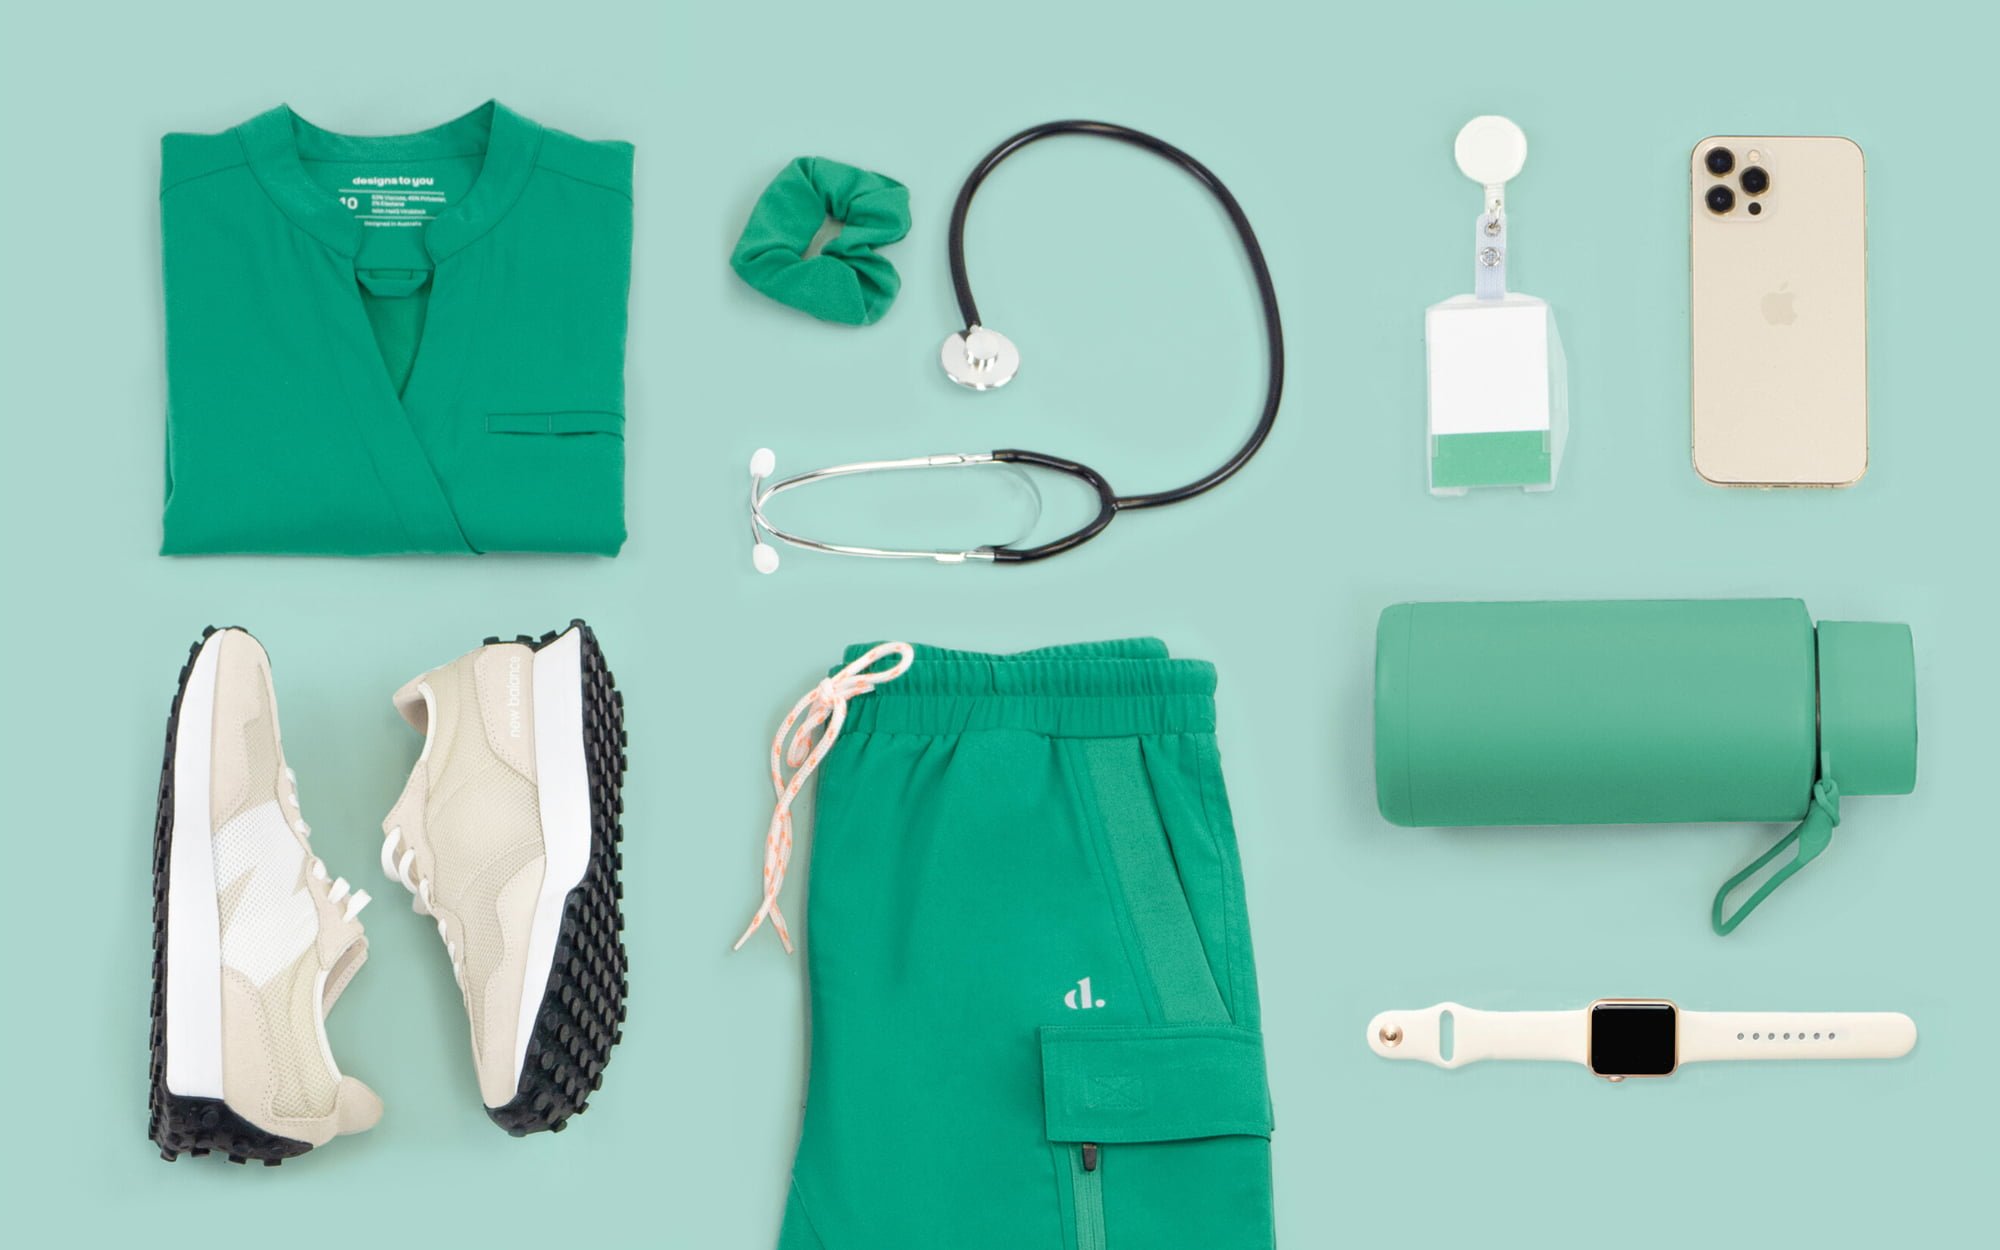 The banner for the article 'The Anatomy of the Perfect Scrubs' features a flat lay of green coloured nursing scrubs, beige sneakers and an assortment of accessories that a healthcare worker may carry with them at work. The items lay atop a mint green background.